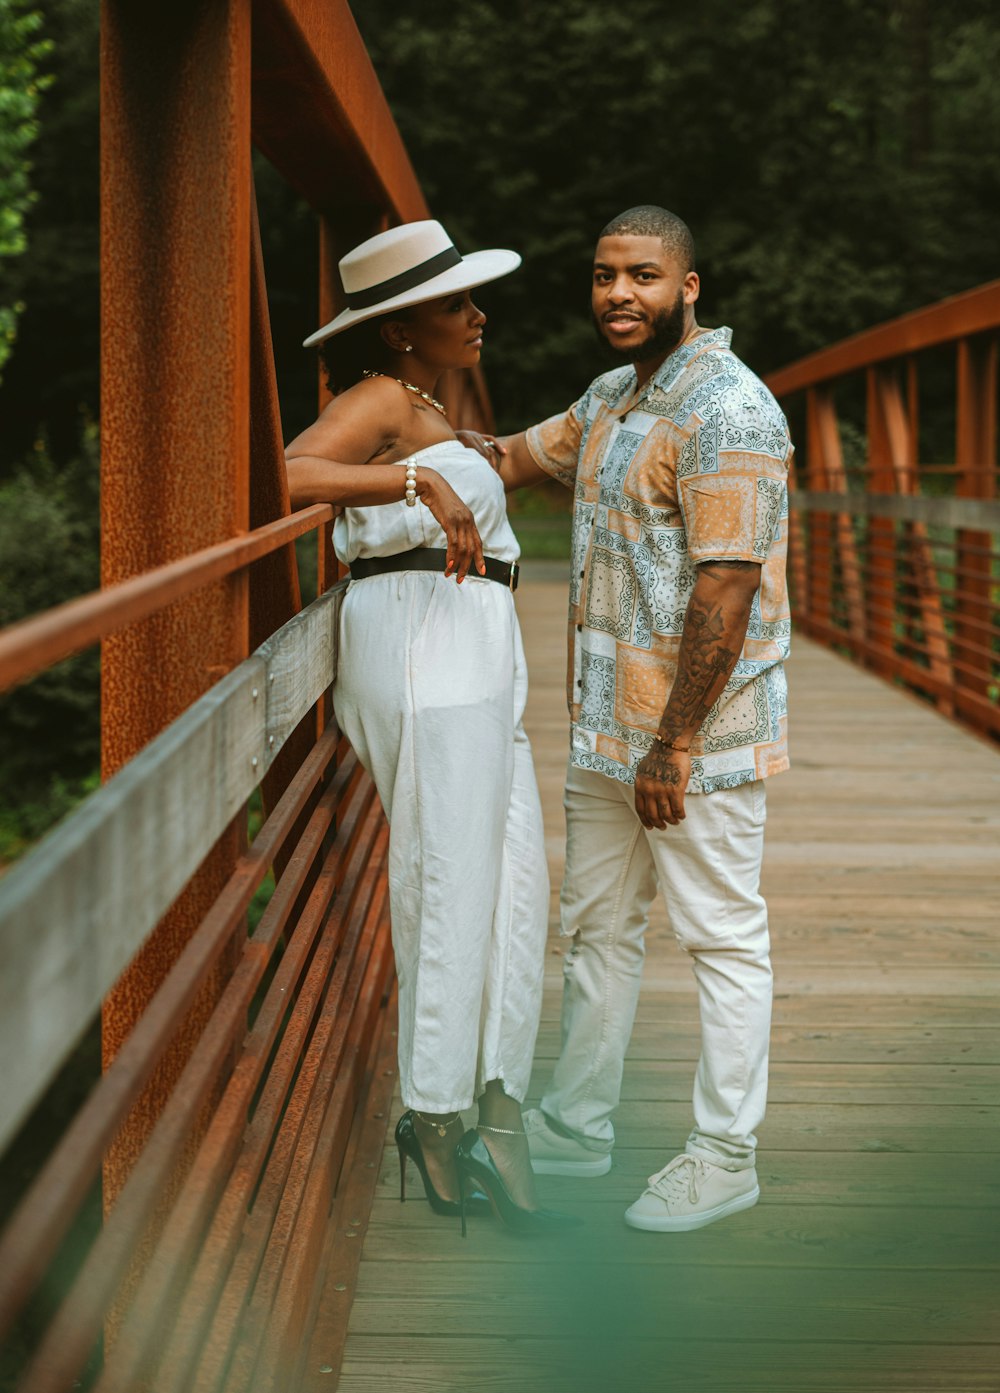 man in white pants and woman in white dress walking on wooden bridge during daytime